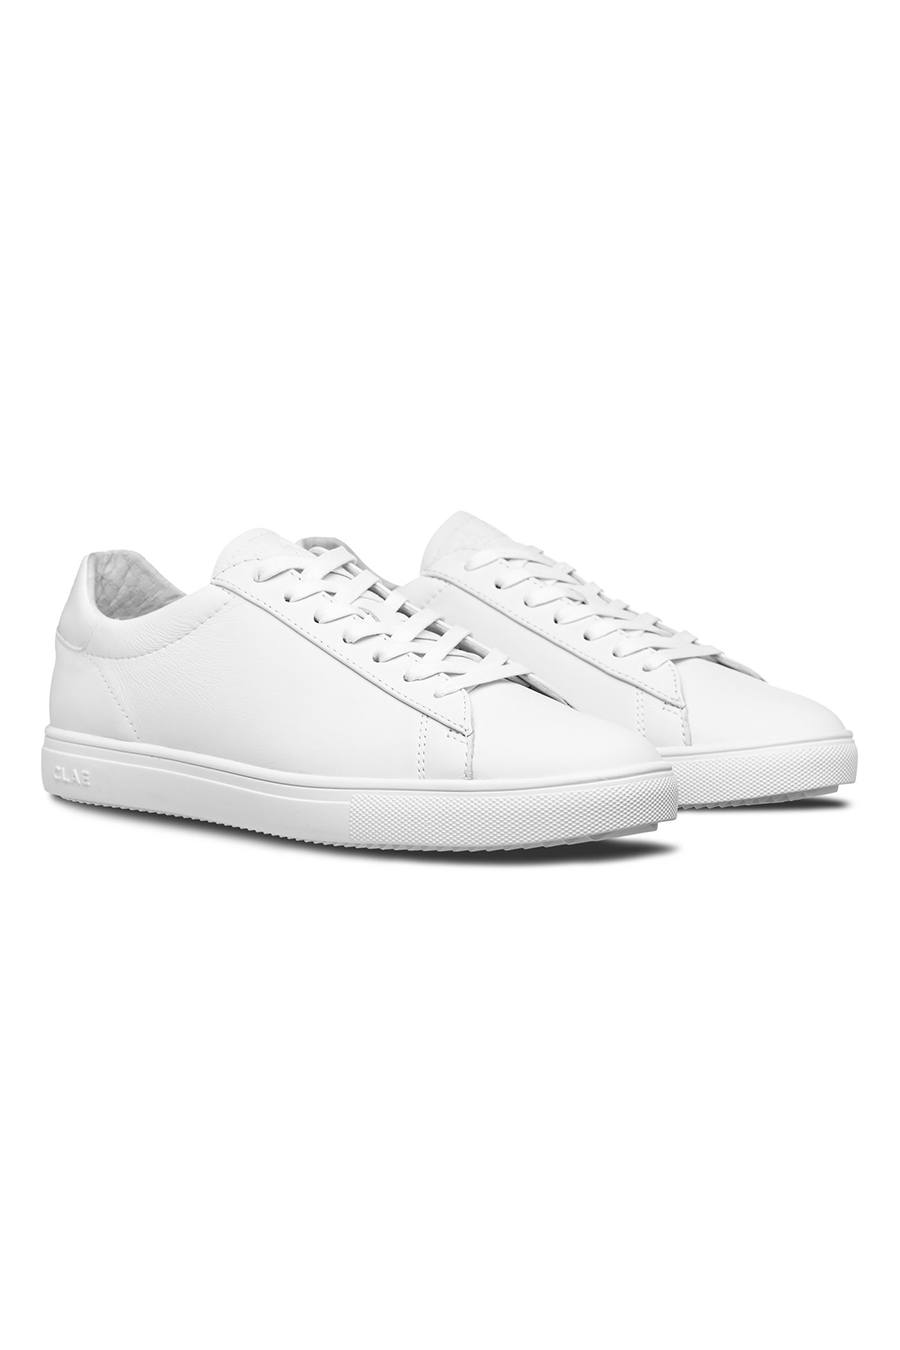 Bradley | Triple White Leather - Main Image Number 1 of 3